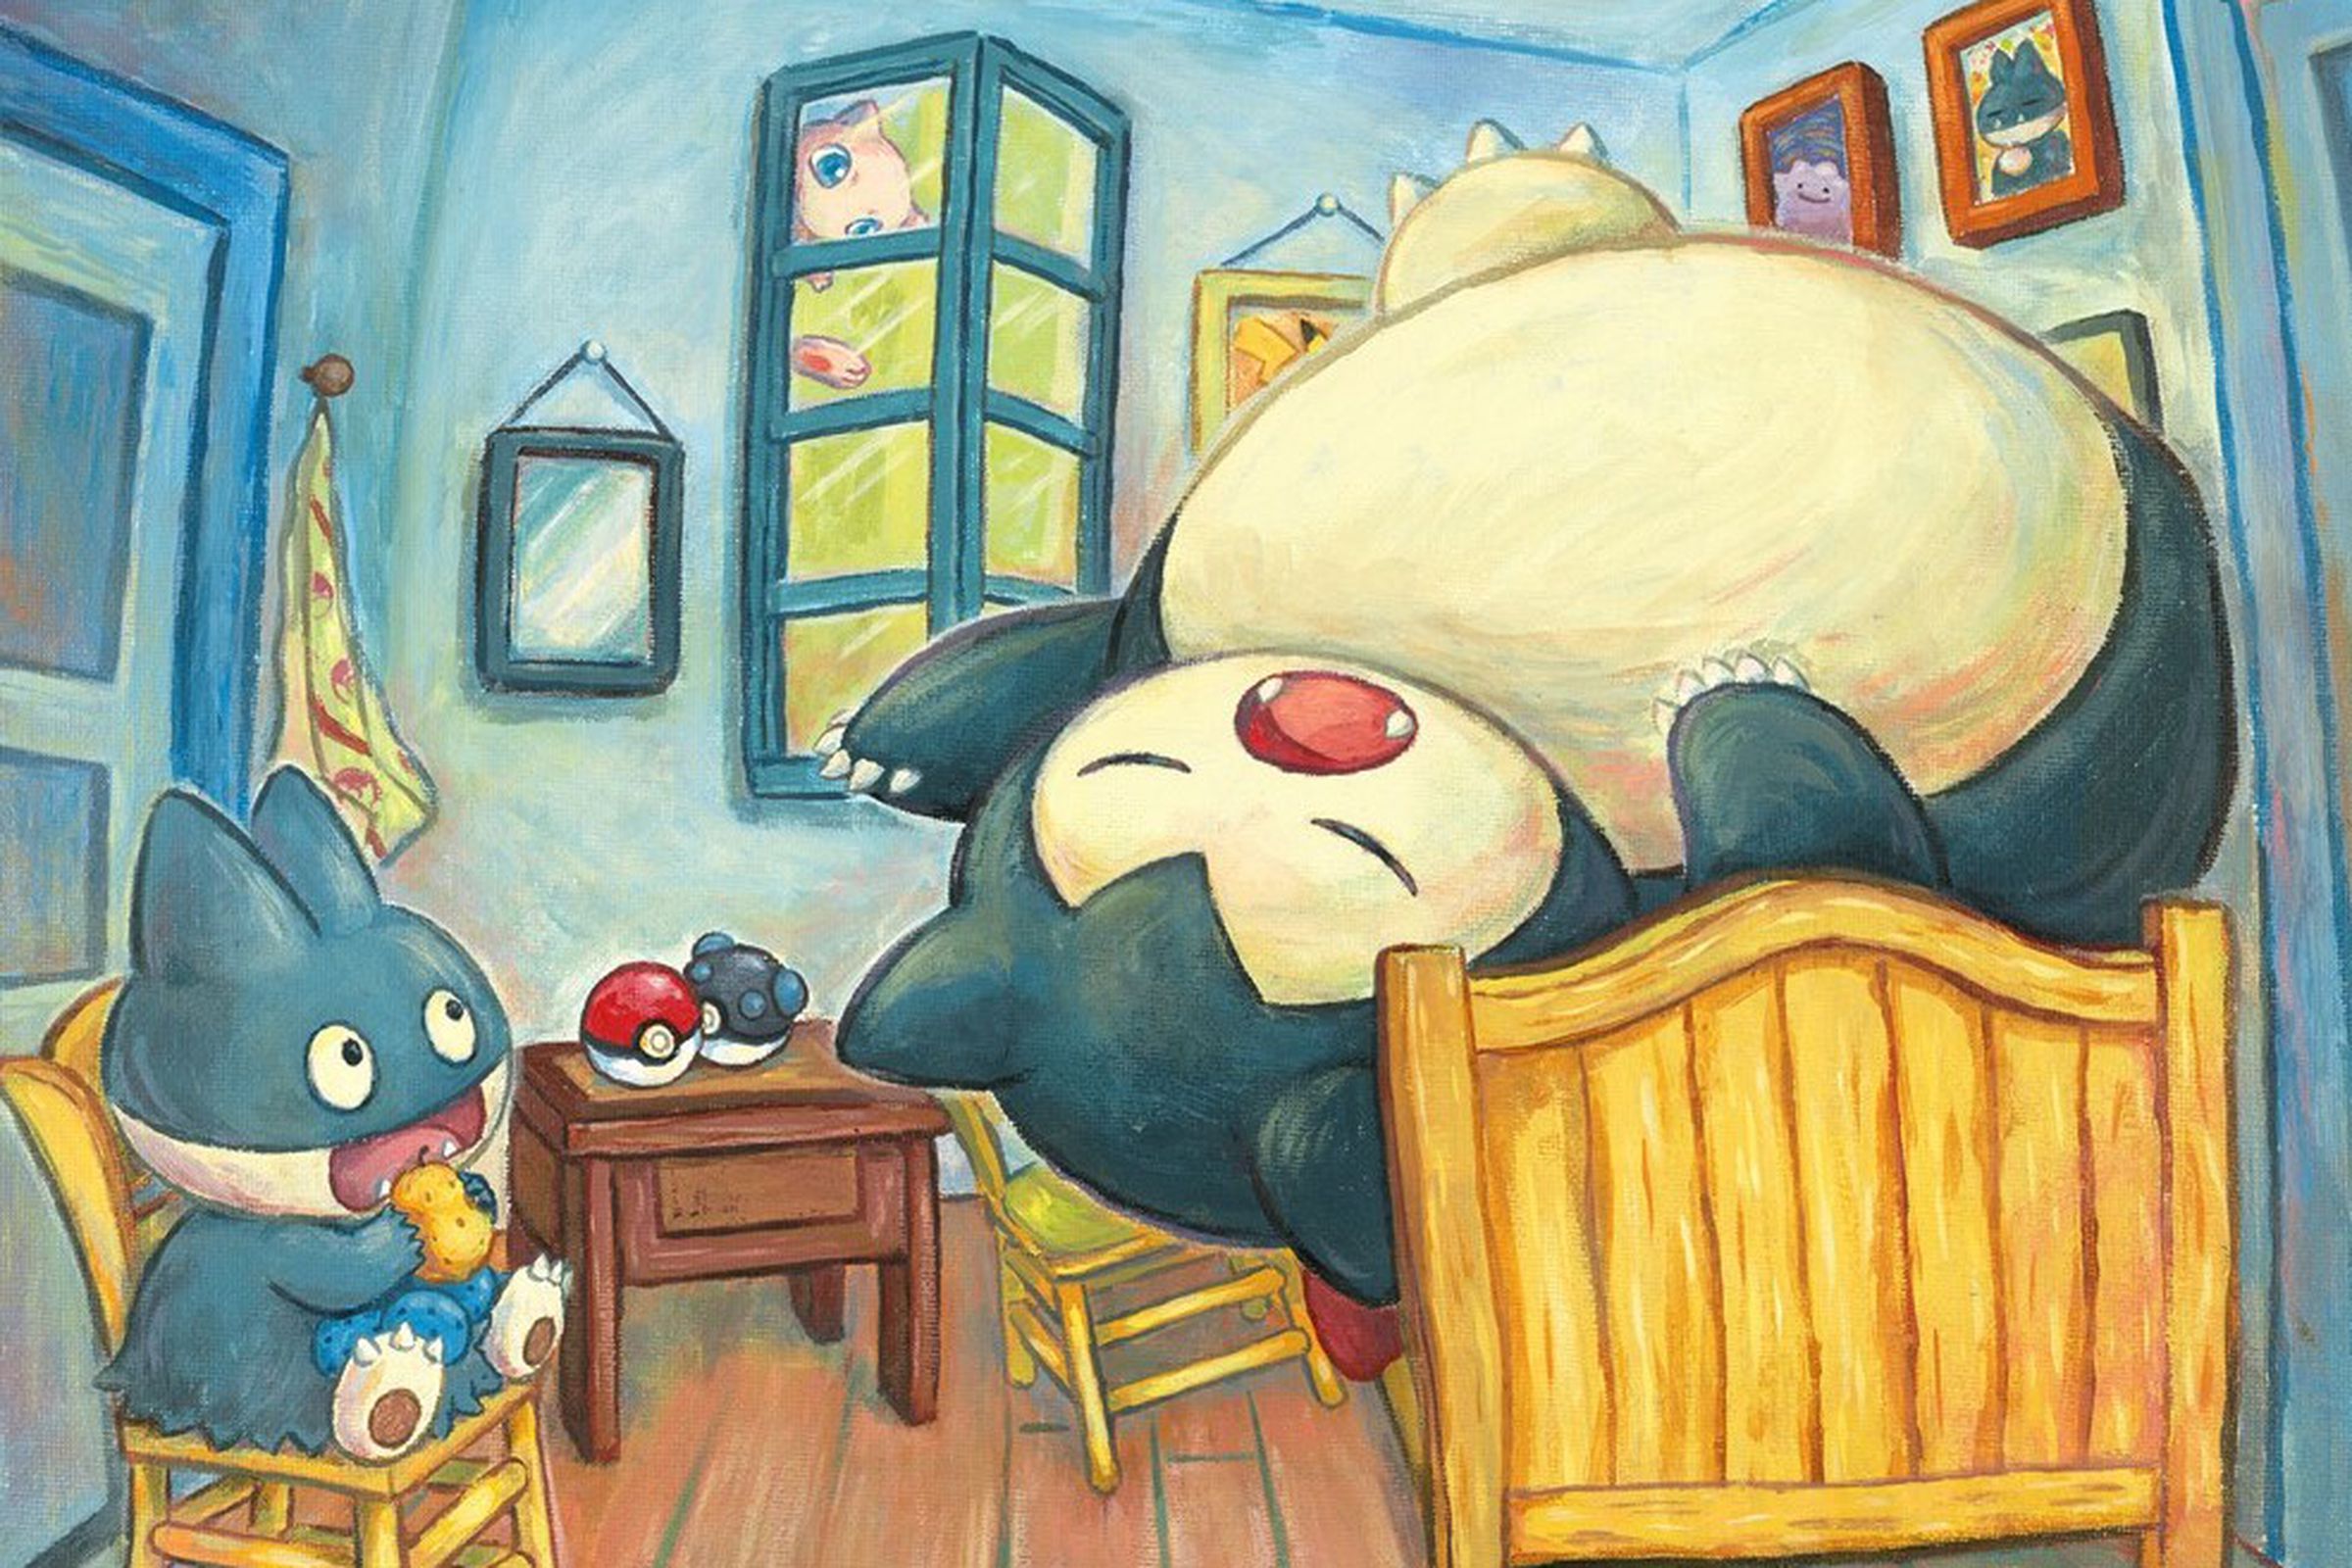 A painting of two bear-like creatures — one small one sitting in a chair eating fruit, and the other is much larger and sleeping in a bed — in a cramped room.